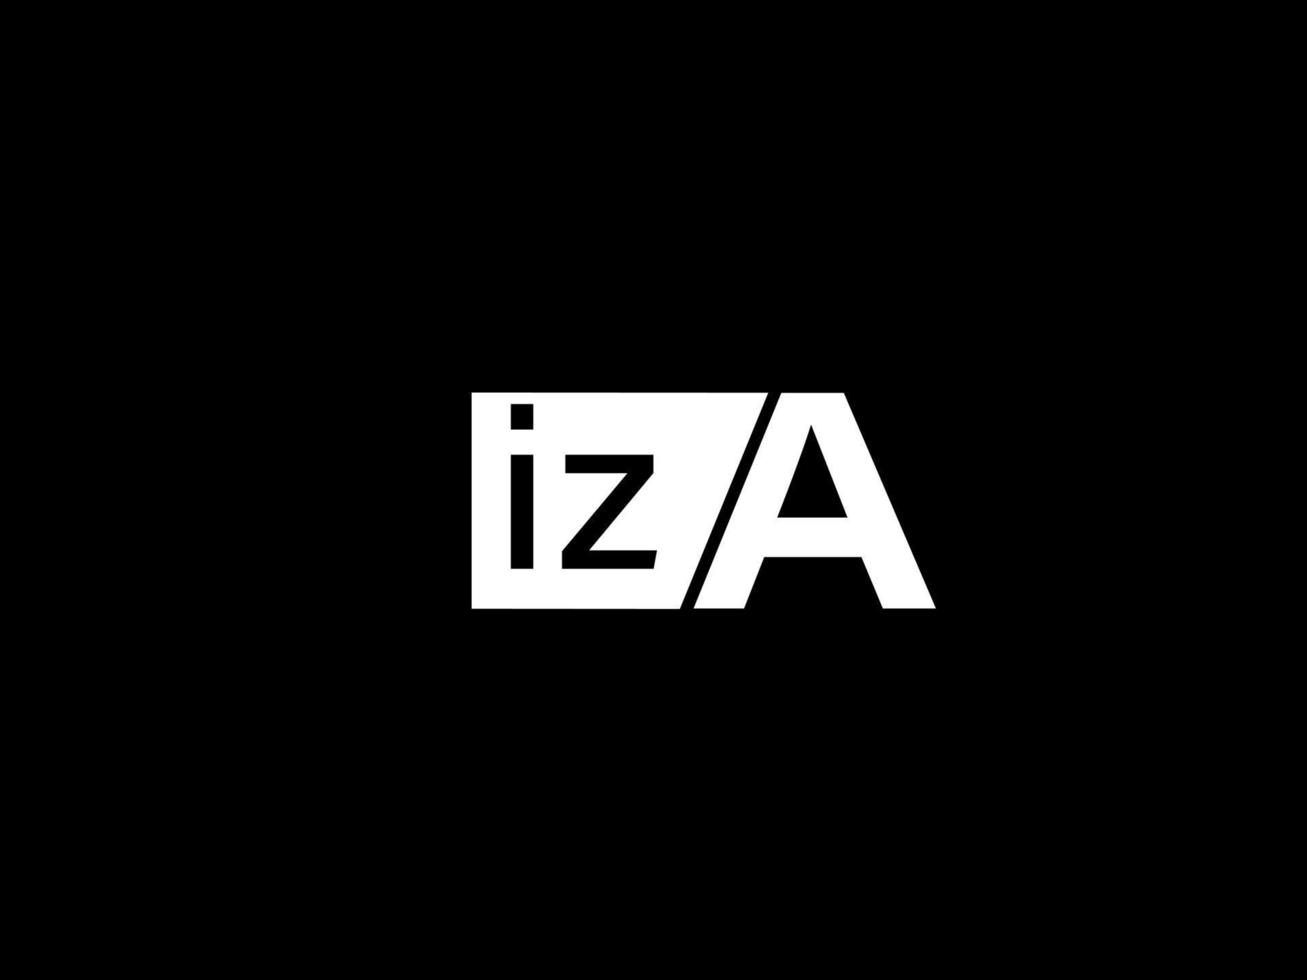 IZA Logo and Graphics design vector art, Icons isolated on black background